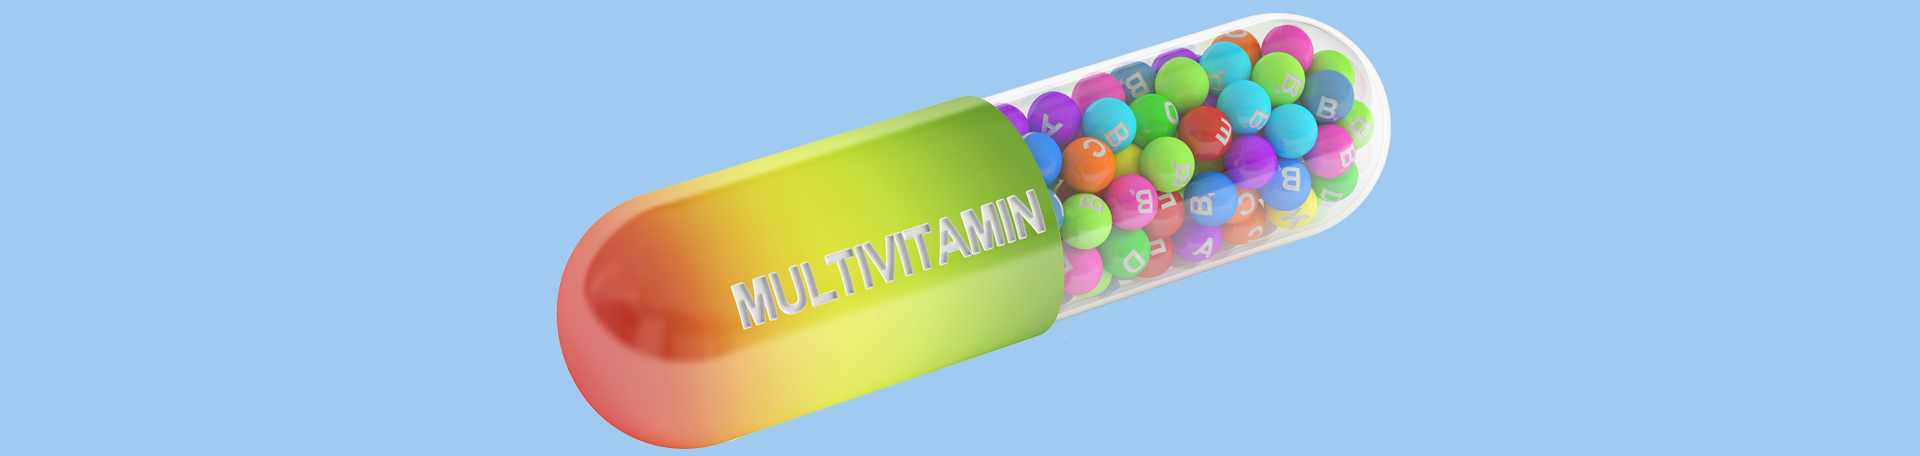 Georgetown multivitamin picture to demonstrate benefits for memory and cognition